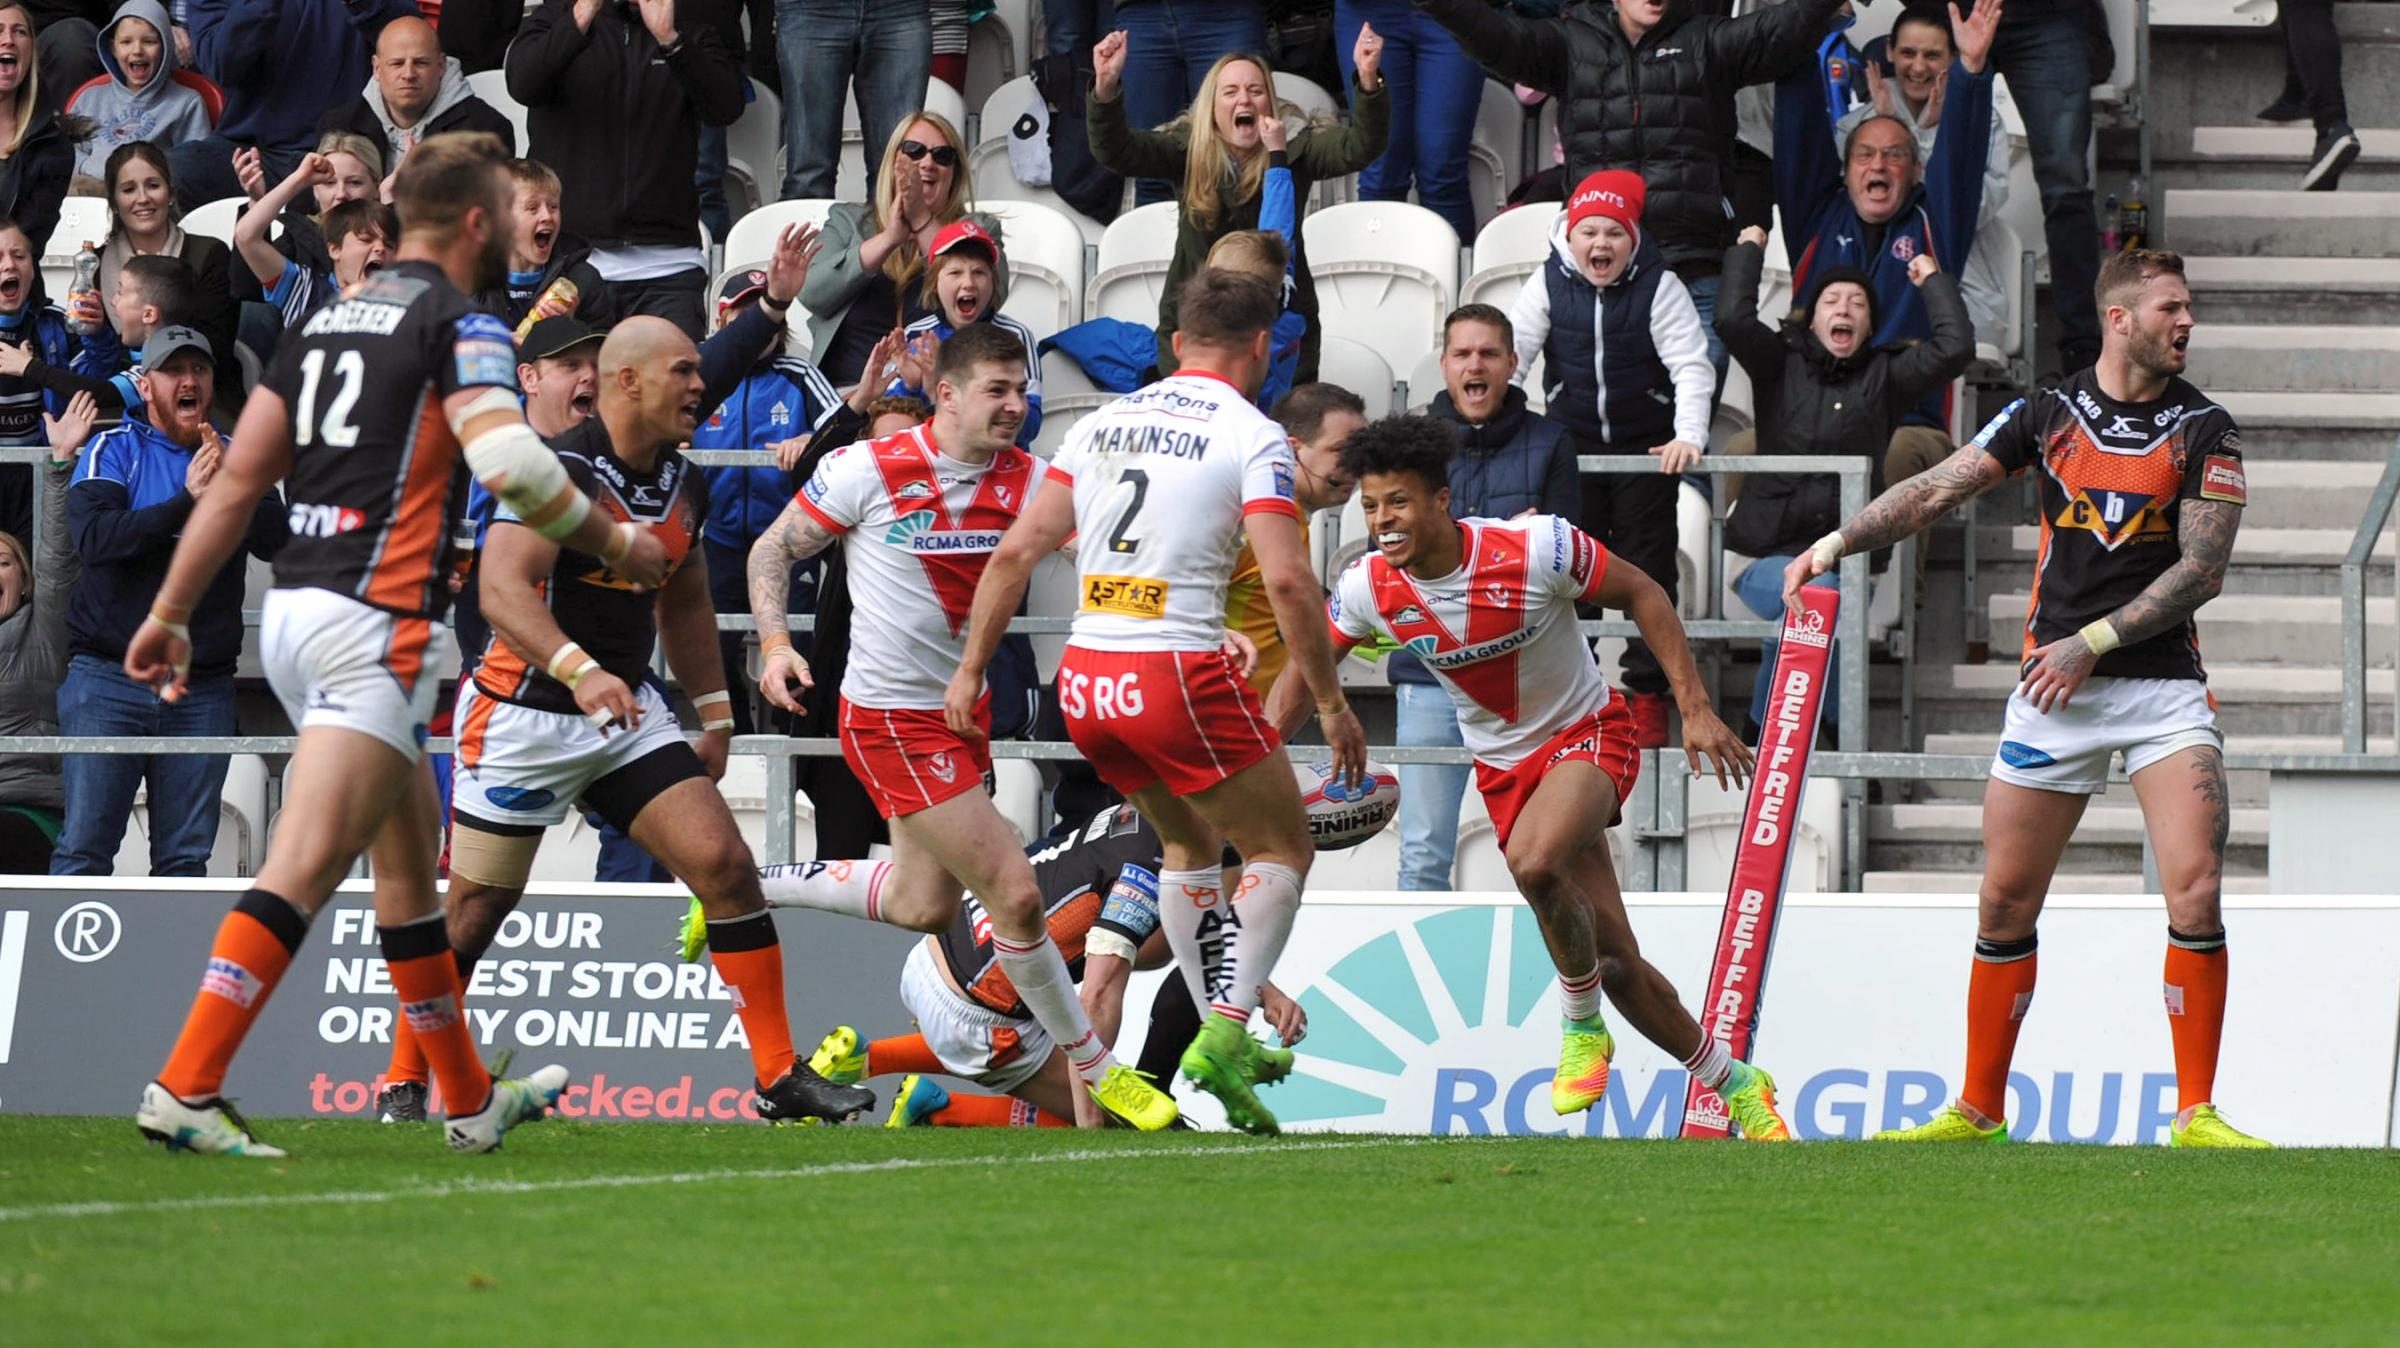 Saints Challenge Cup clash at Castleford will be televised - St Helens Star